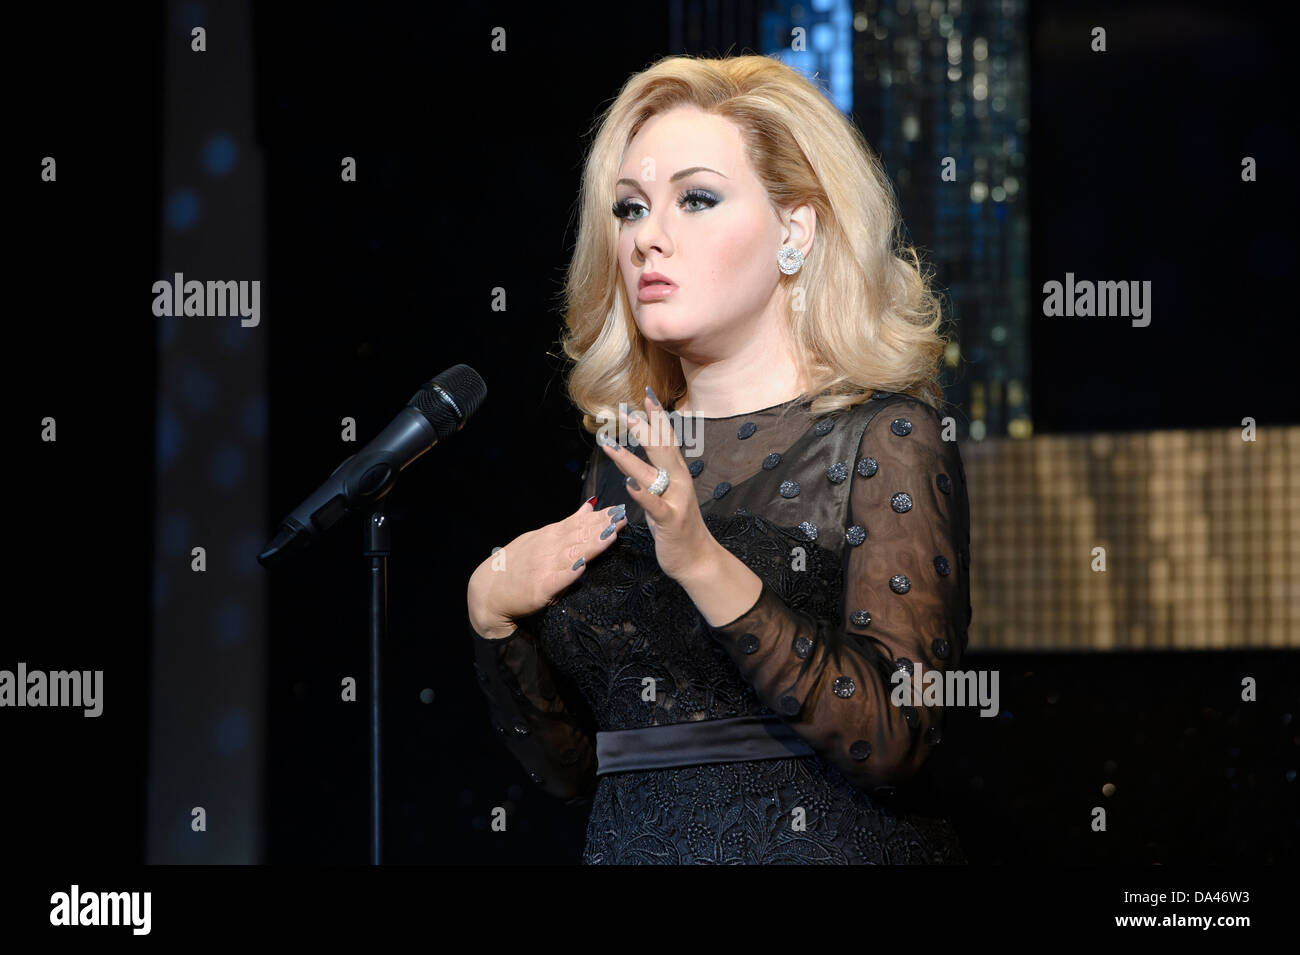 The waxwork of British singer, Adele is unveiled at Madame Tussauds, London. Stock Photo